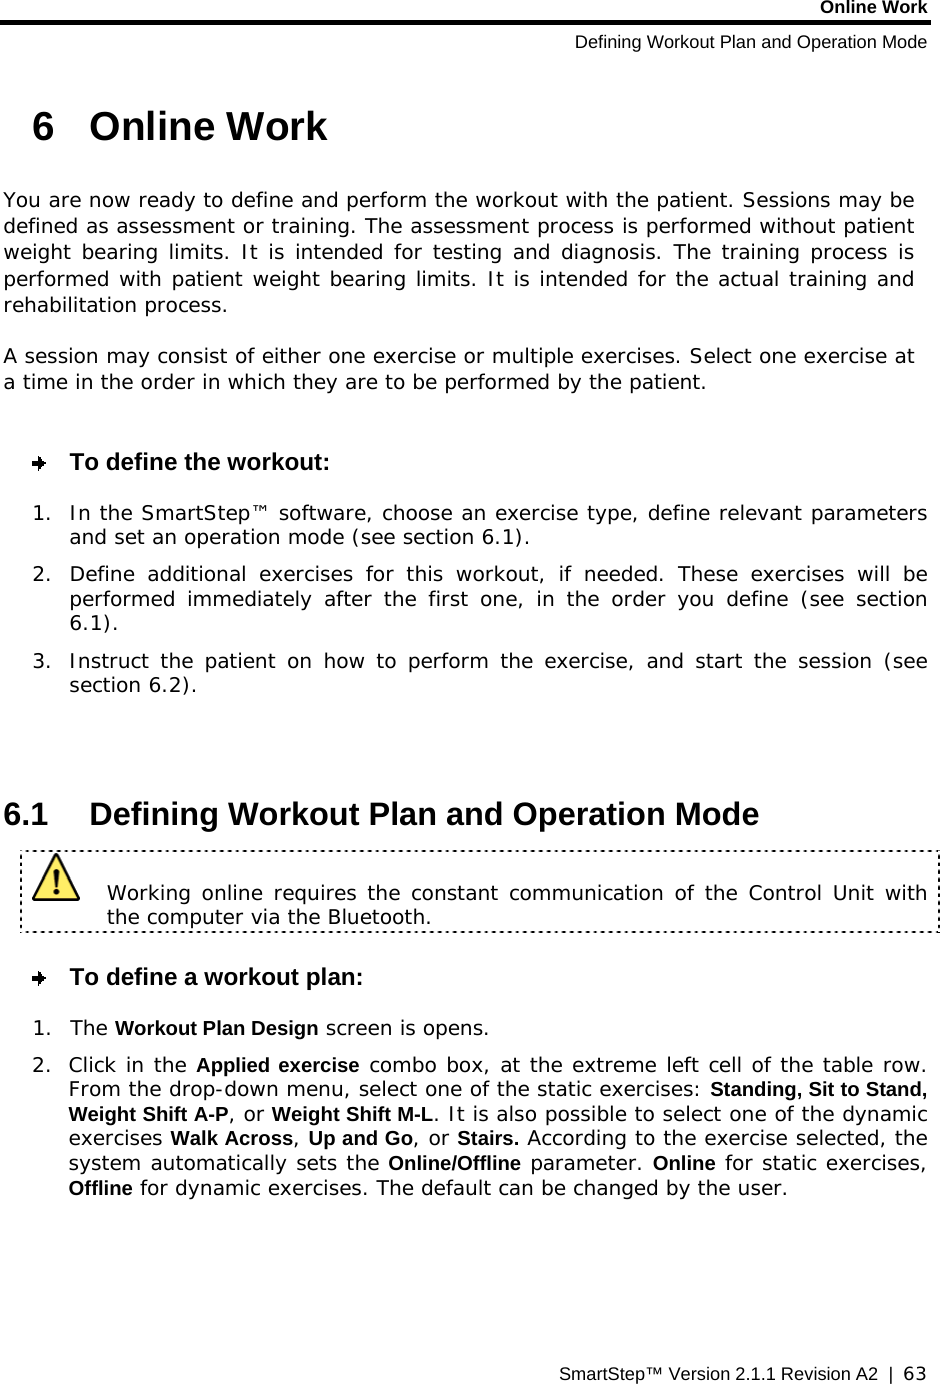 Online Work Defining Workout Plan and Operation Mode SmartStep™ Version 2.1.1 Revision A2  |  63  6  Online Work  You are now ready to define and perform the workout with the patient. Sessions may be defined as assessment or training. The assessment process is performed without patient weight bearing limits. It is intended for testing and diagnosis. The training process is performed with patient weight bearing limits. It is intended for the actual training and rehabilitation process. A session may consist of either one exercise or multiple exercises. Select one exercise at a time in the order in which they are to be performed by the patient.   To define the workout: 1.  In the SmartStep™ software, choose an exercise type, define relevant parameters and set an operation mode (see section  6.1). 2.  Define additional exercises for this workout, if needed. These exercises will be performed immediately after the first one, in the order you define (see section  6.1). 3.  Instruct the patient on how to perform the exercise, and start the session (see section  6.2).   6.1  Defining Workout Plan and Operation Mode   Working online requires the constant communication of the Control Unit with the computer via the Bluetooth.    To define a workout plan: 1. The Workout Plan Design screen is opens.   2. Click in the Applied exercise combo box, at the extreme left cell of the table row. From the drop-down menu, select one of the static exercises: Standing, Sit to Stand, Weight Shift A-P, or Weight Shift M-L. It is also possible to select one of the dynamic exercises Walk Across, Up and Go, or Stairs. According to the exercise selected, the system automatically sets the Online/Offline parameter. Online for static exercises, Offline for dynamic exercises. The default can be changed by the user.   